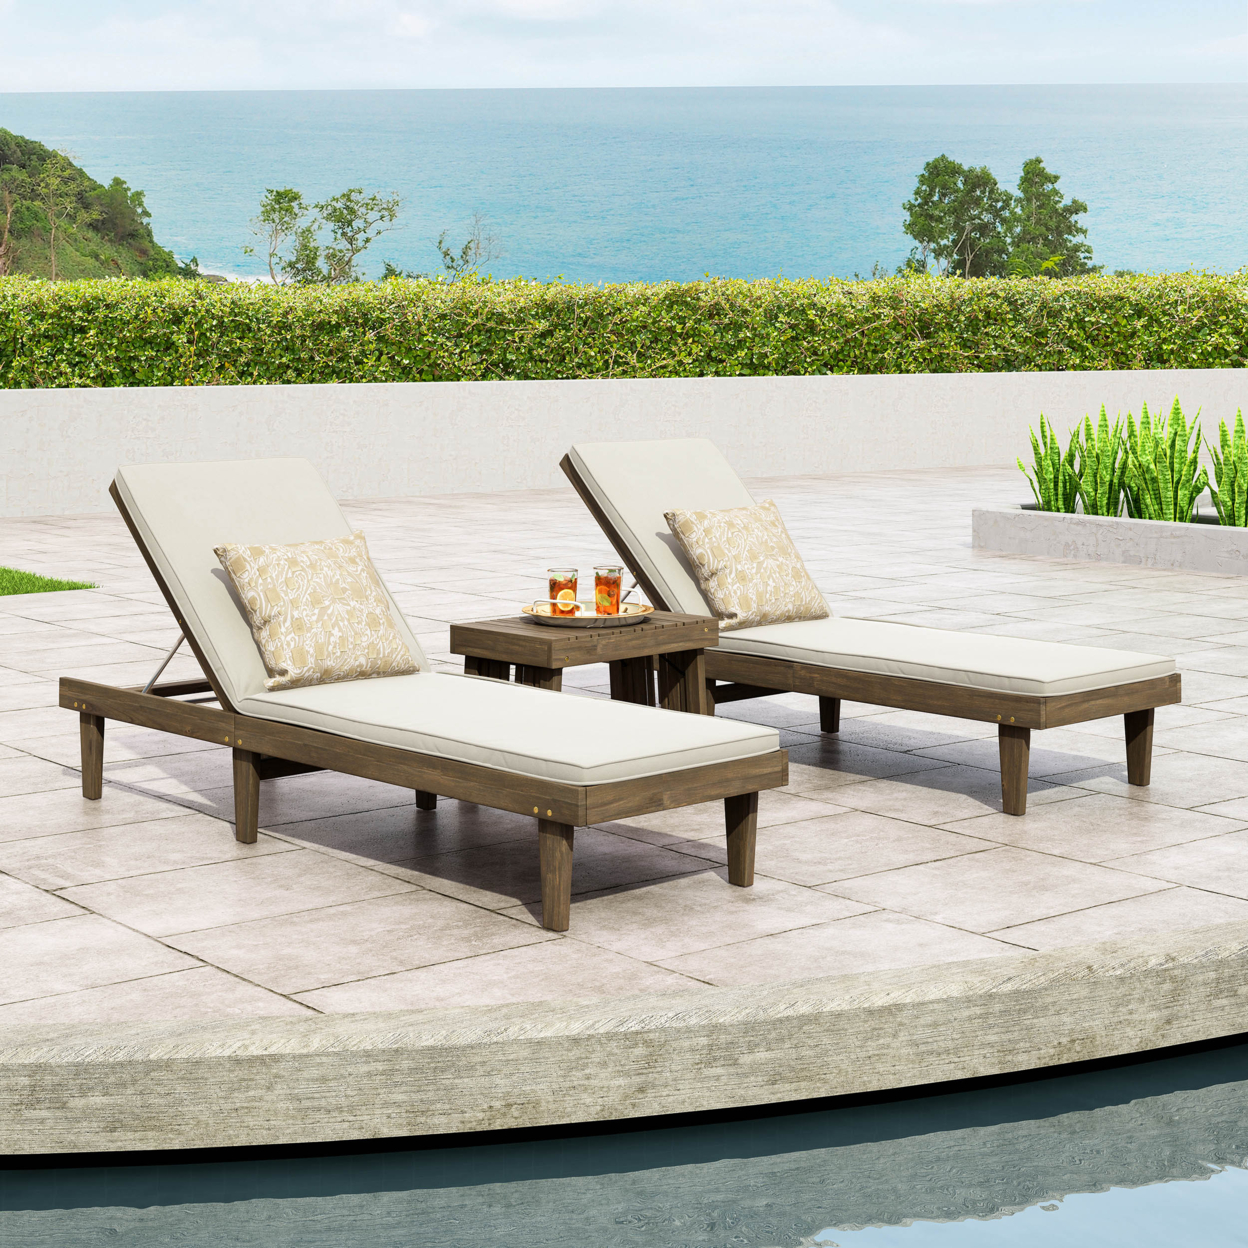 Addisyn Outdoor Acacia Wood 3 Piece Chaise Lounge Set With Water-Resistant Cushions - Gray/cream